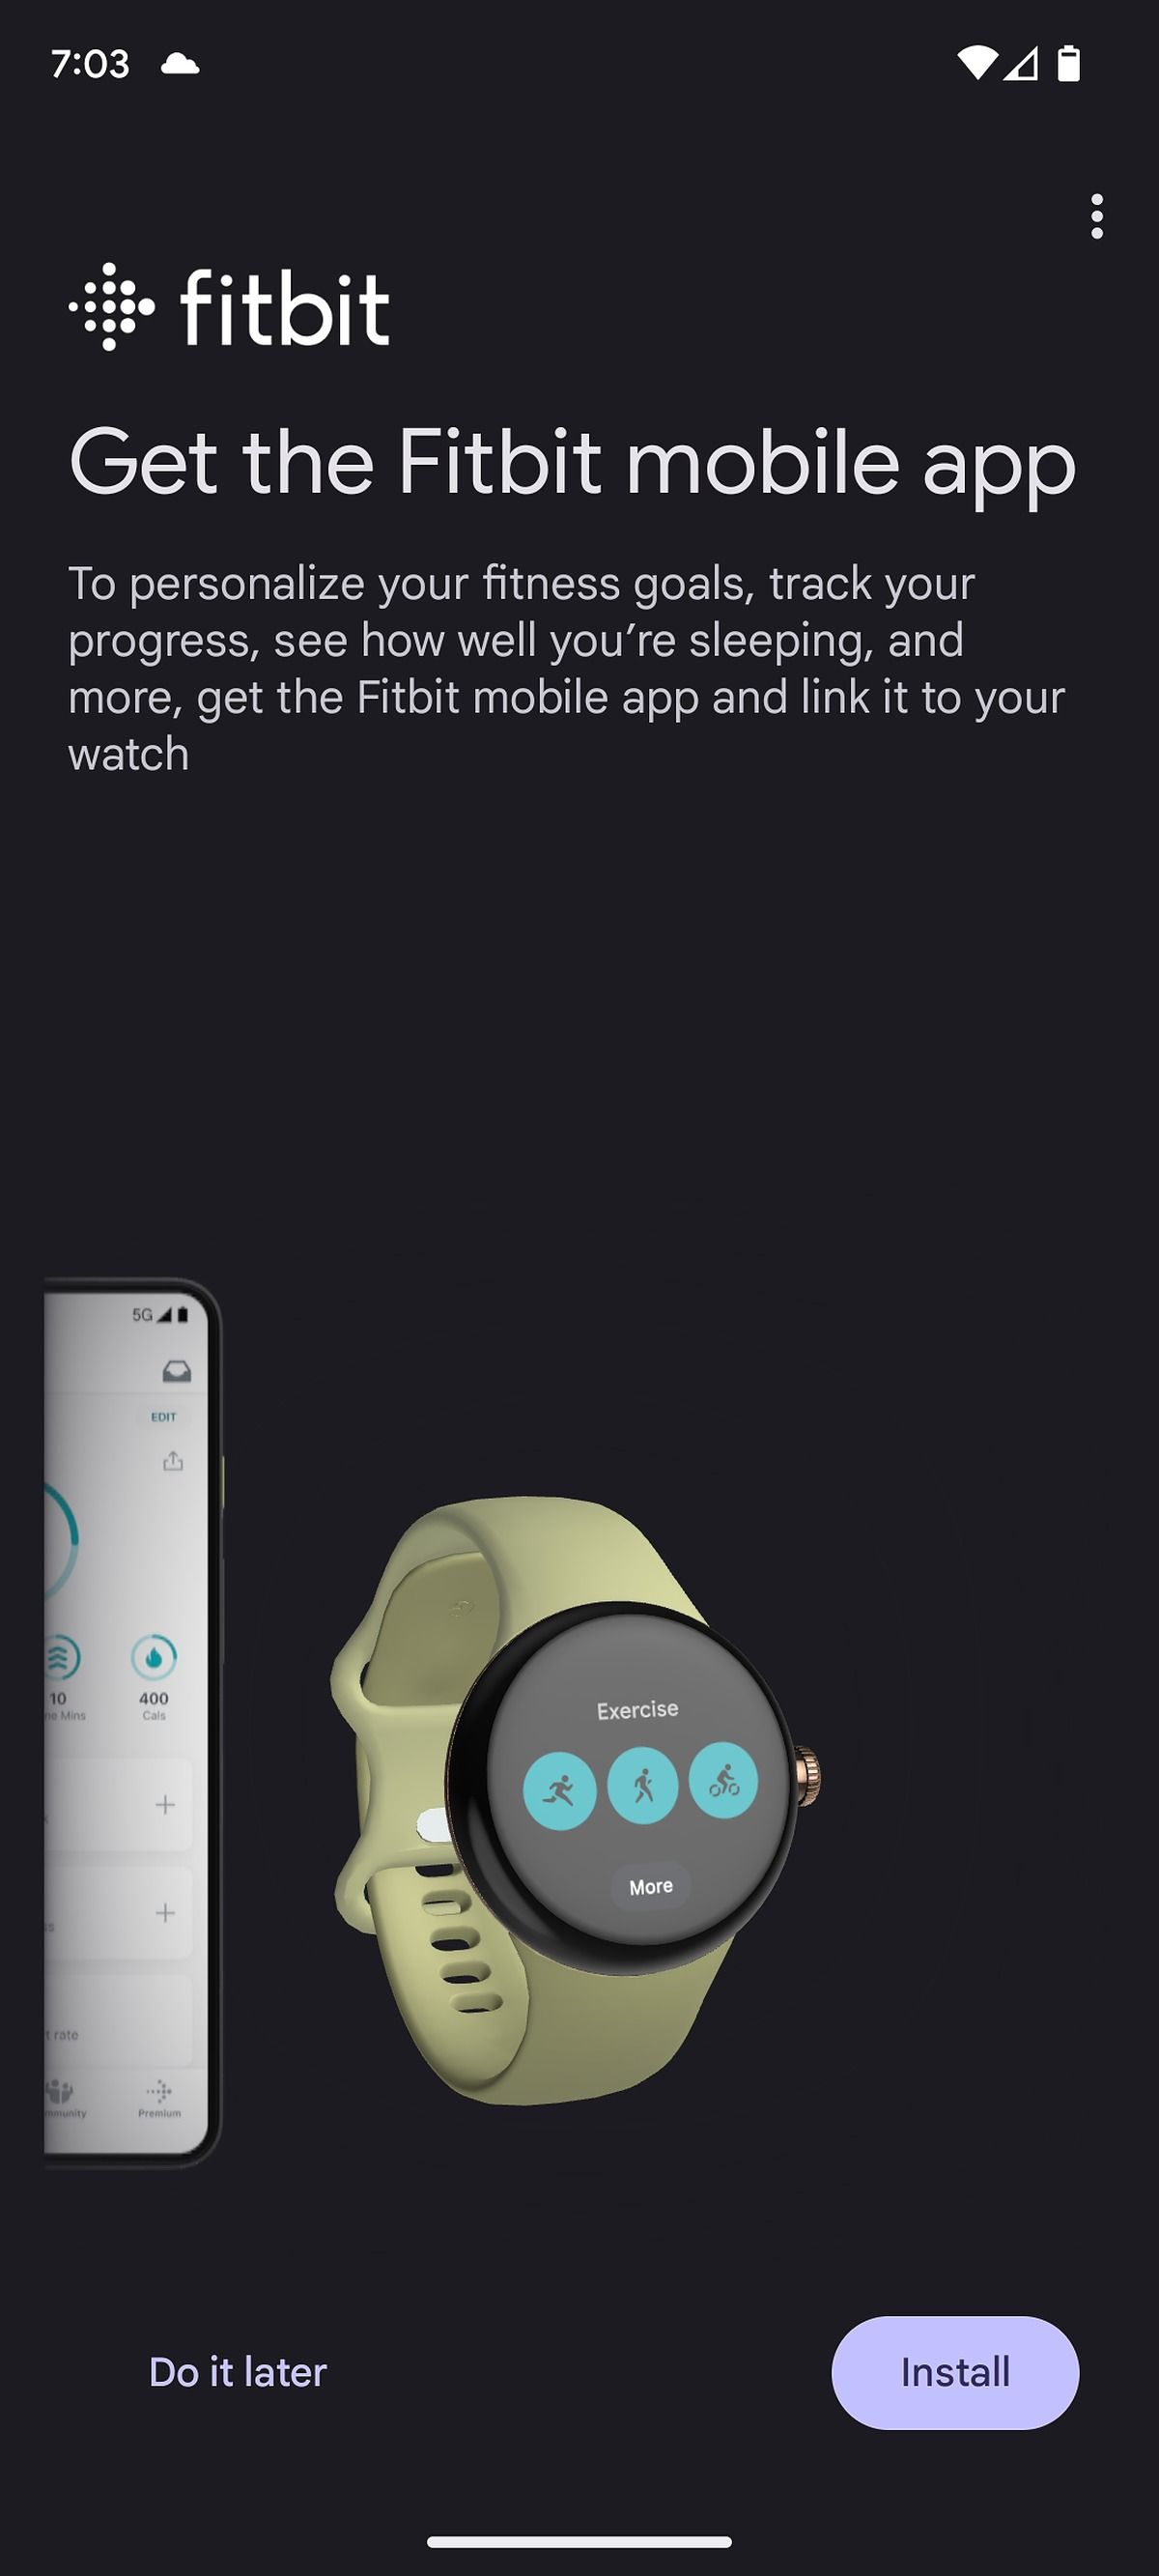 A prompt to get the Fitbit app while setting up the Pixel Watch.